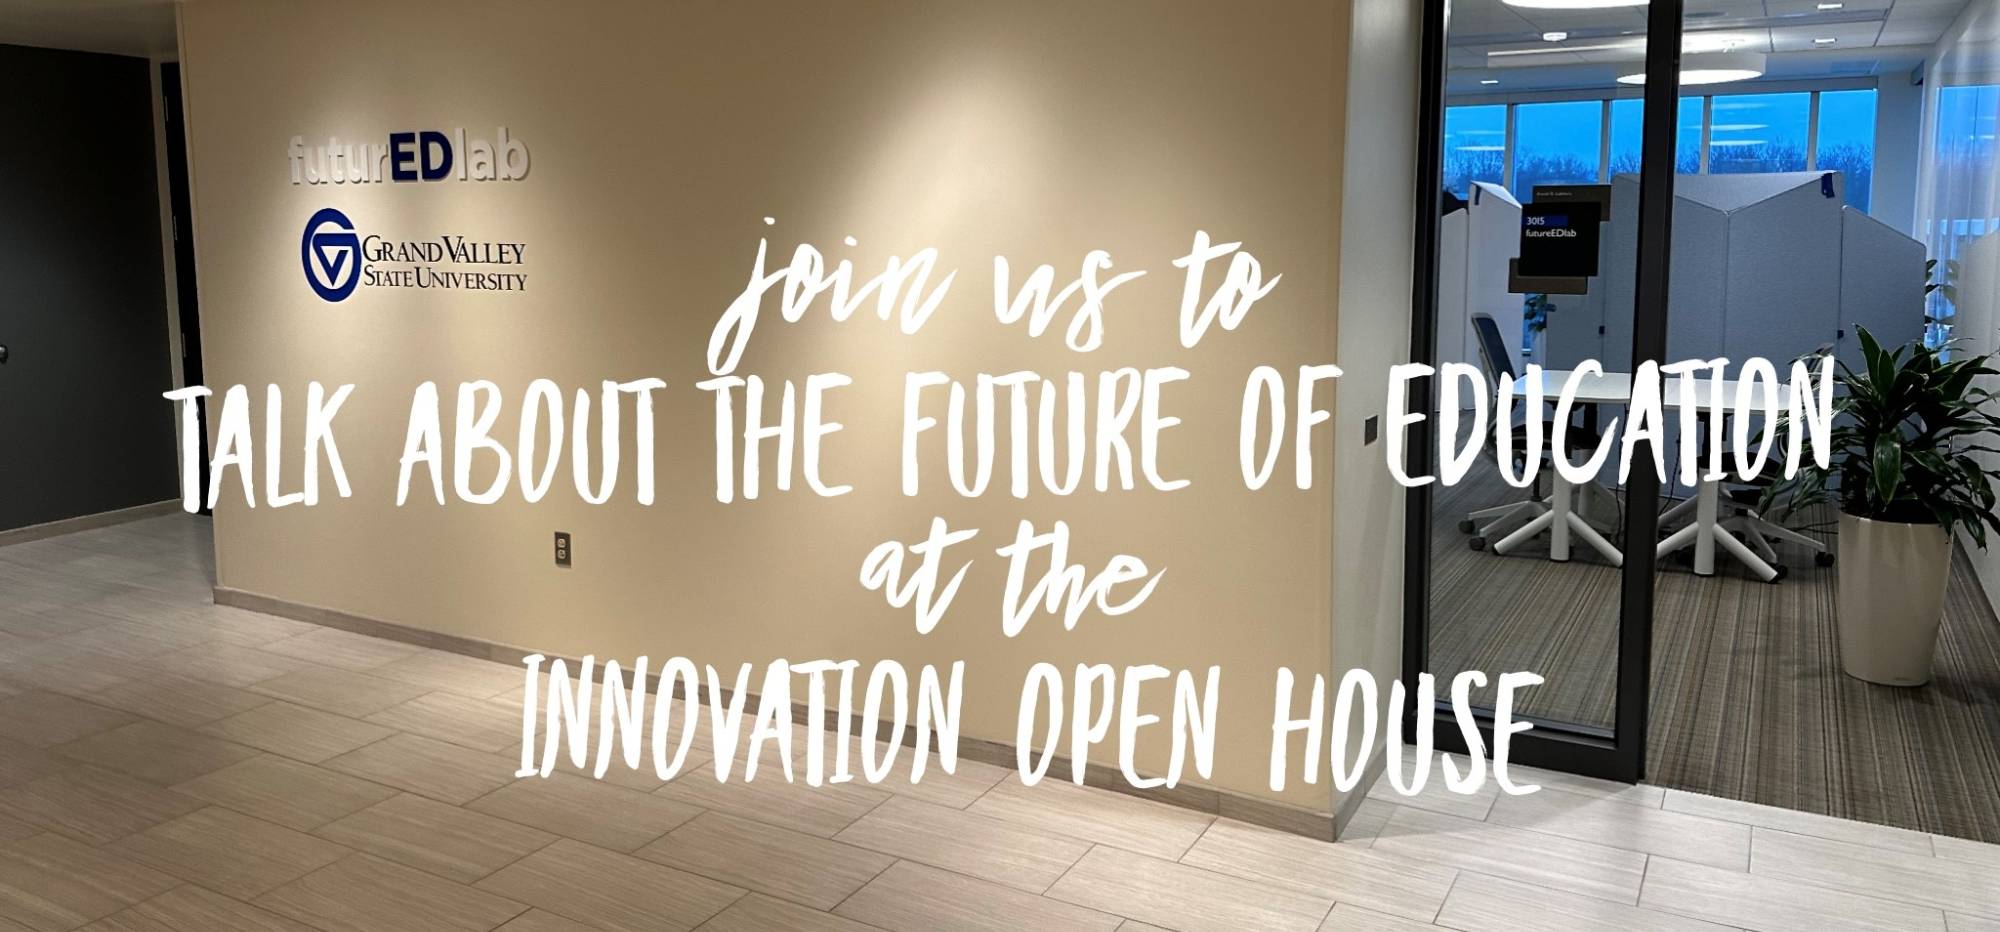 join us to talk about the future of education at the innovation open house